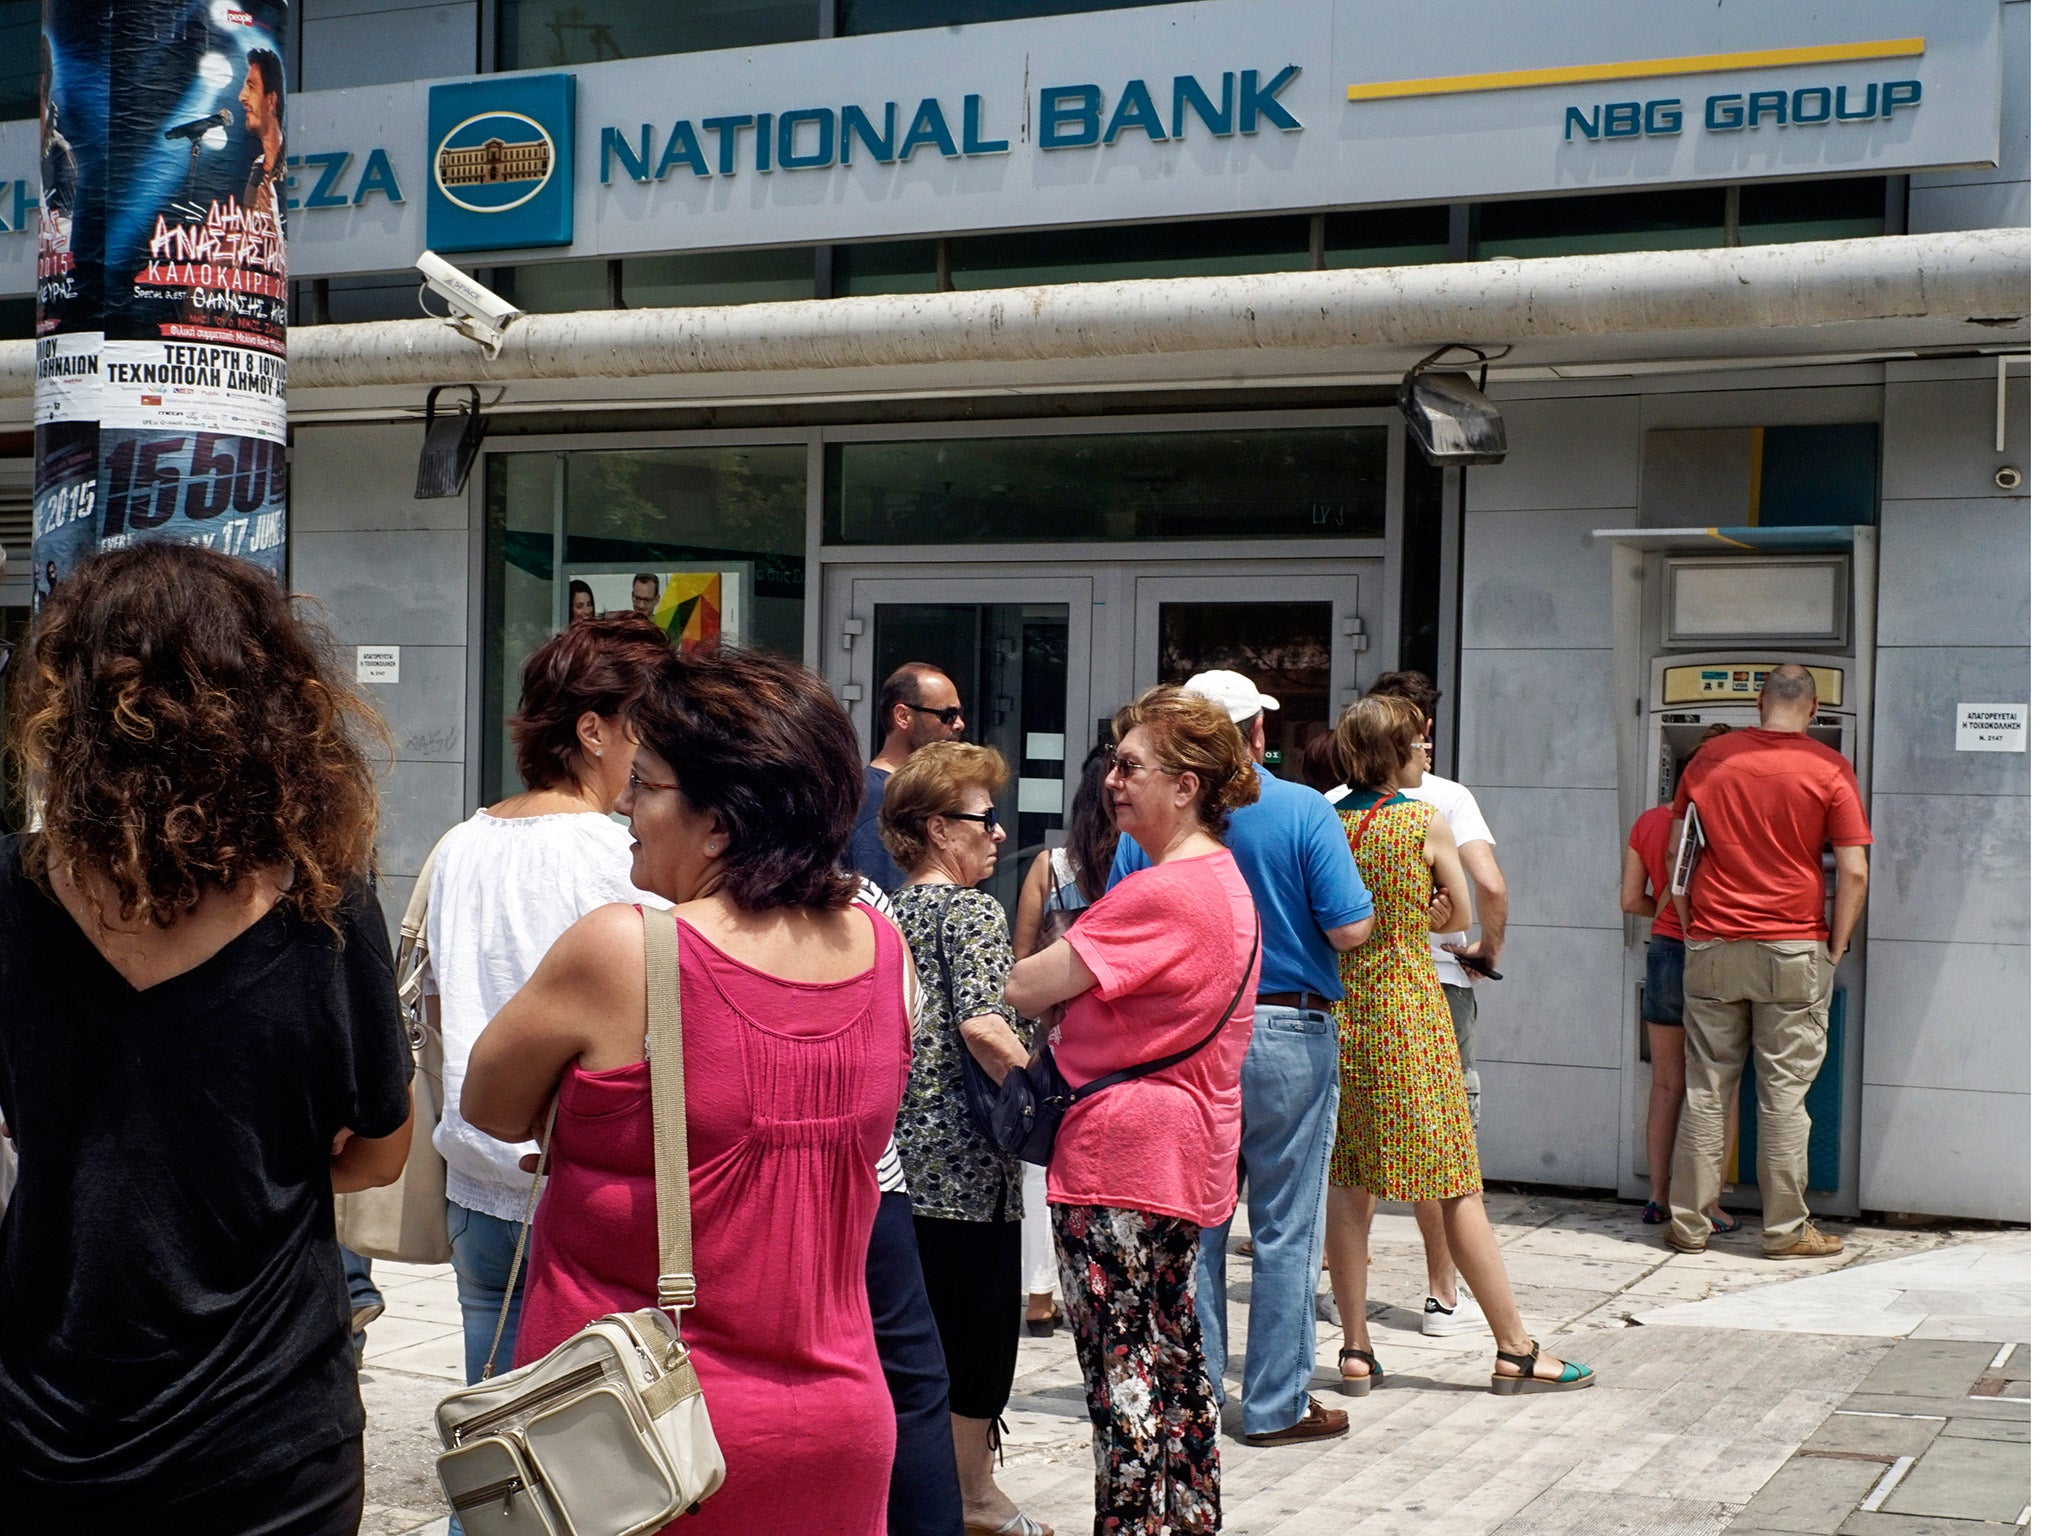 Greeks have been queuing to withdraw cash from their banks over the weekend following the announcement of a referendum on EU bailout terms